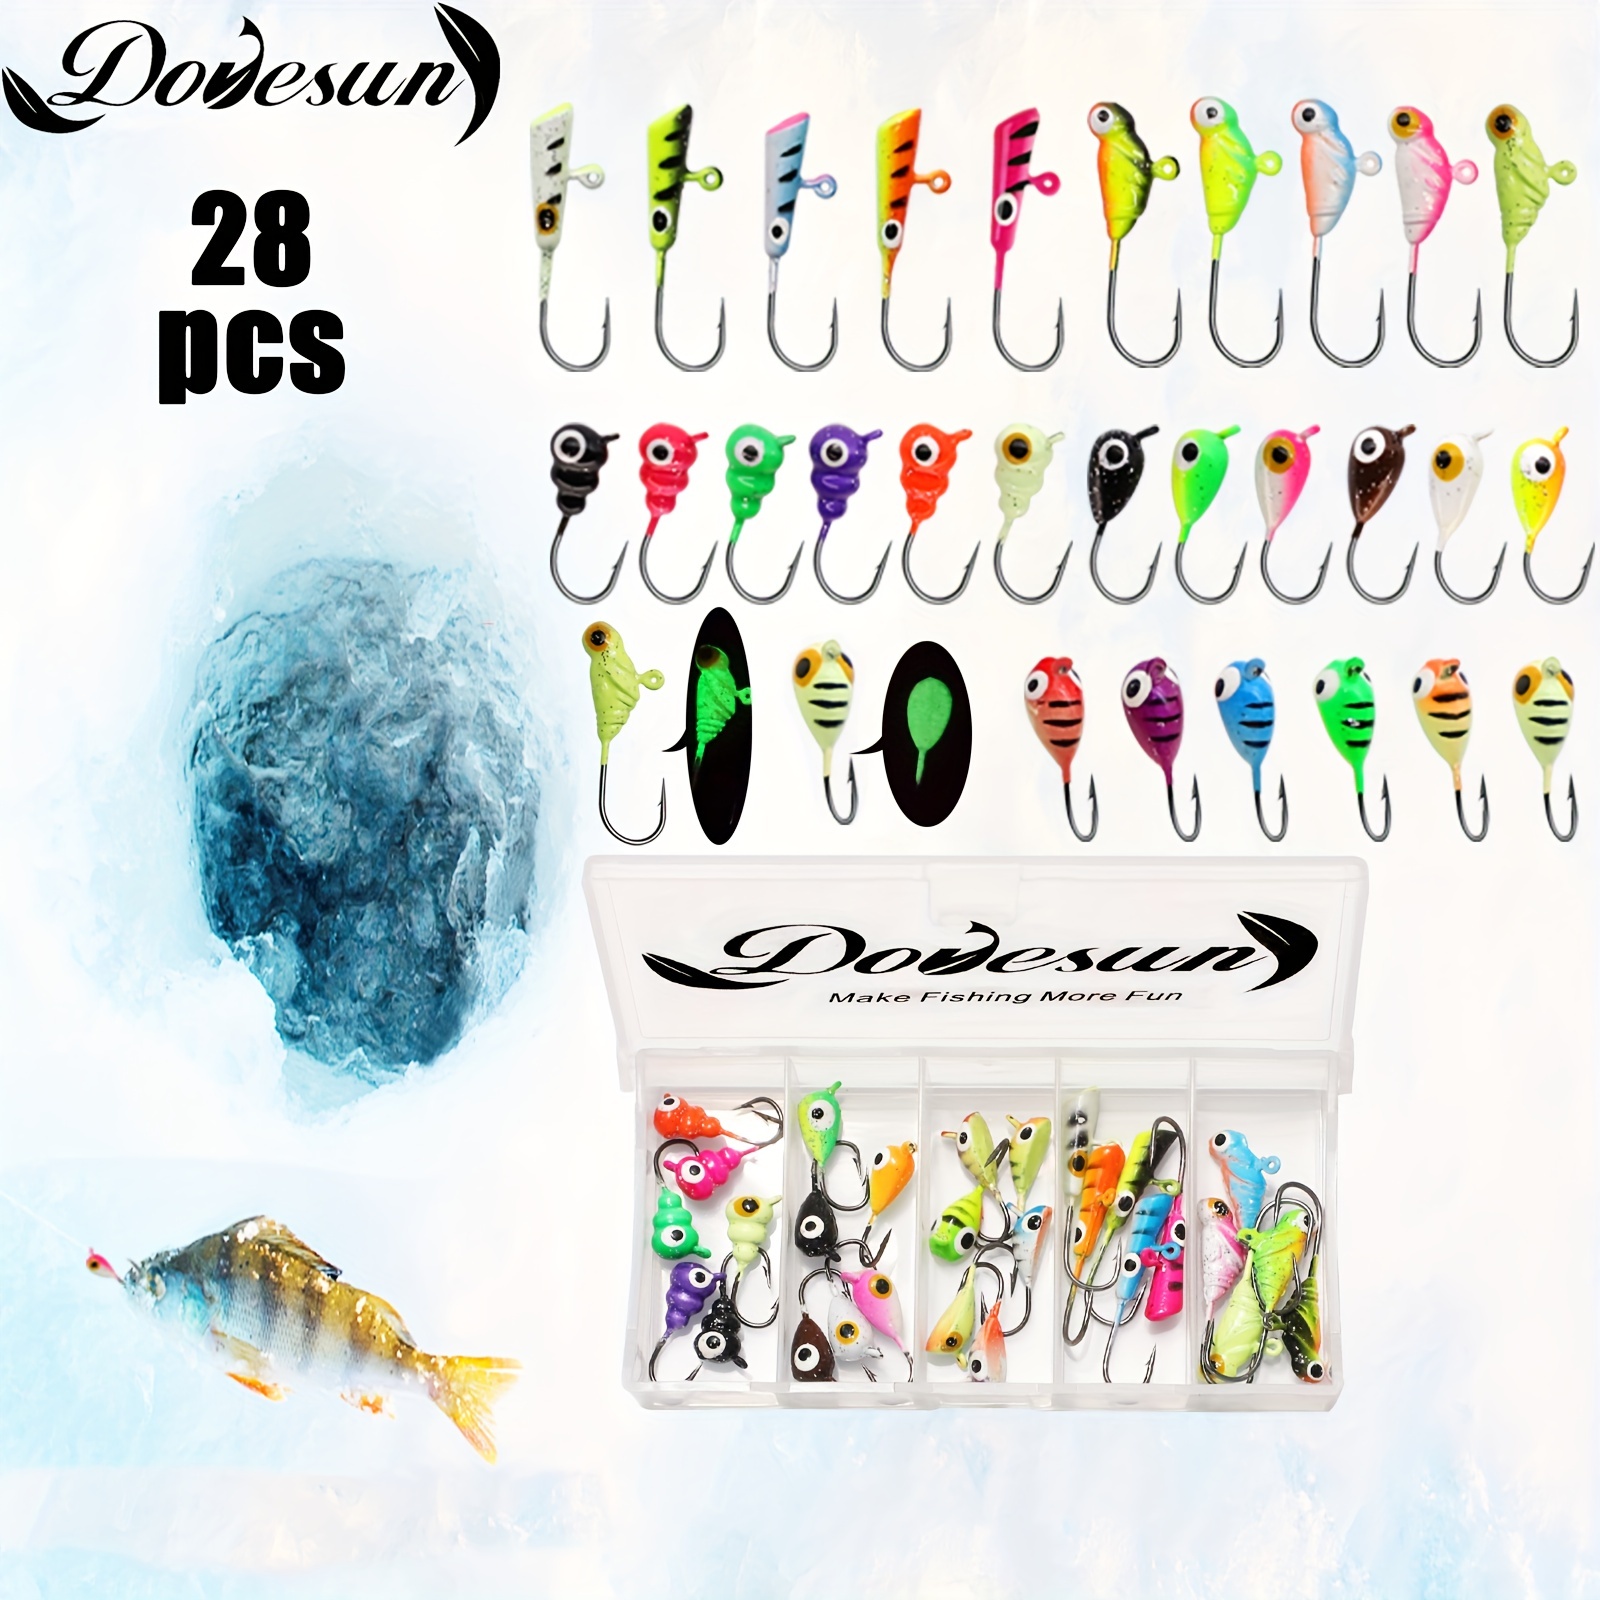 Dovesun 110pcs Crappie Lures with Jig Heads Hooks Kit- Soft